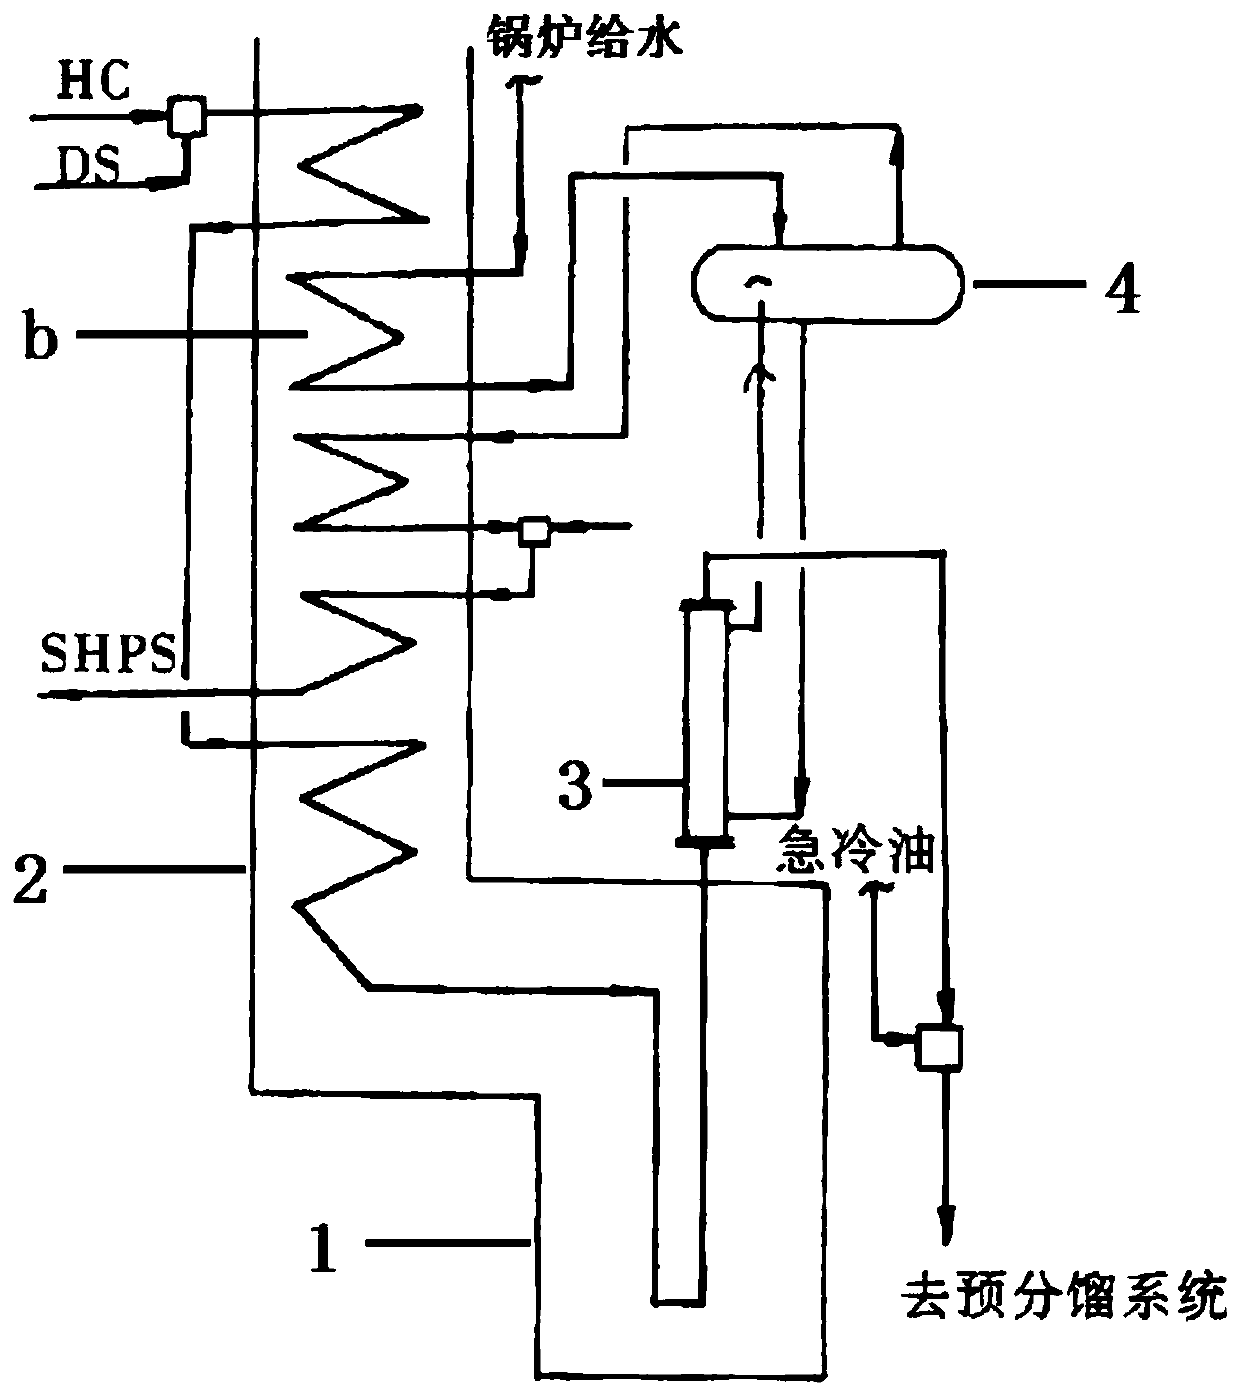 Heat exchange process and heat exchange system for ethylene cracking furnace